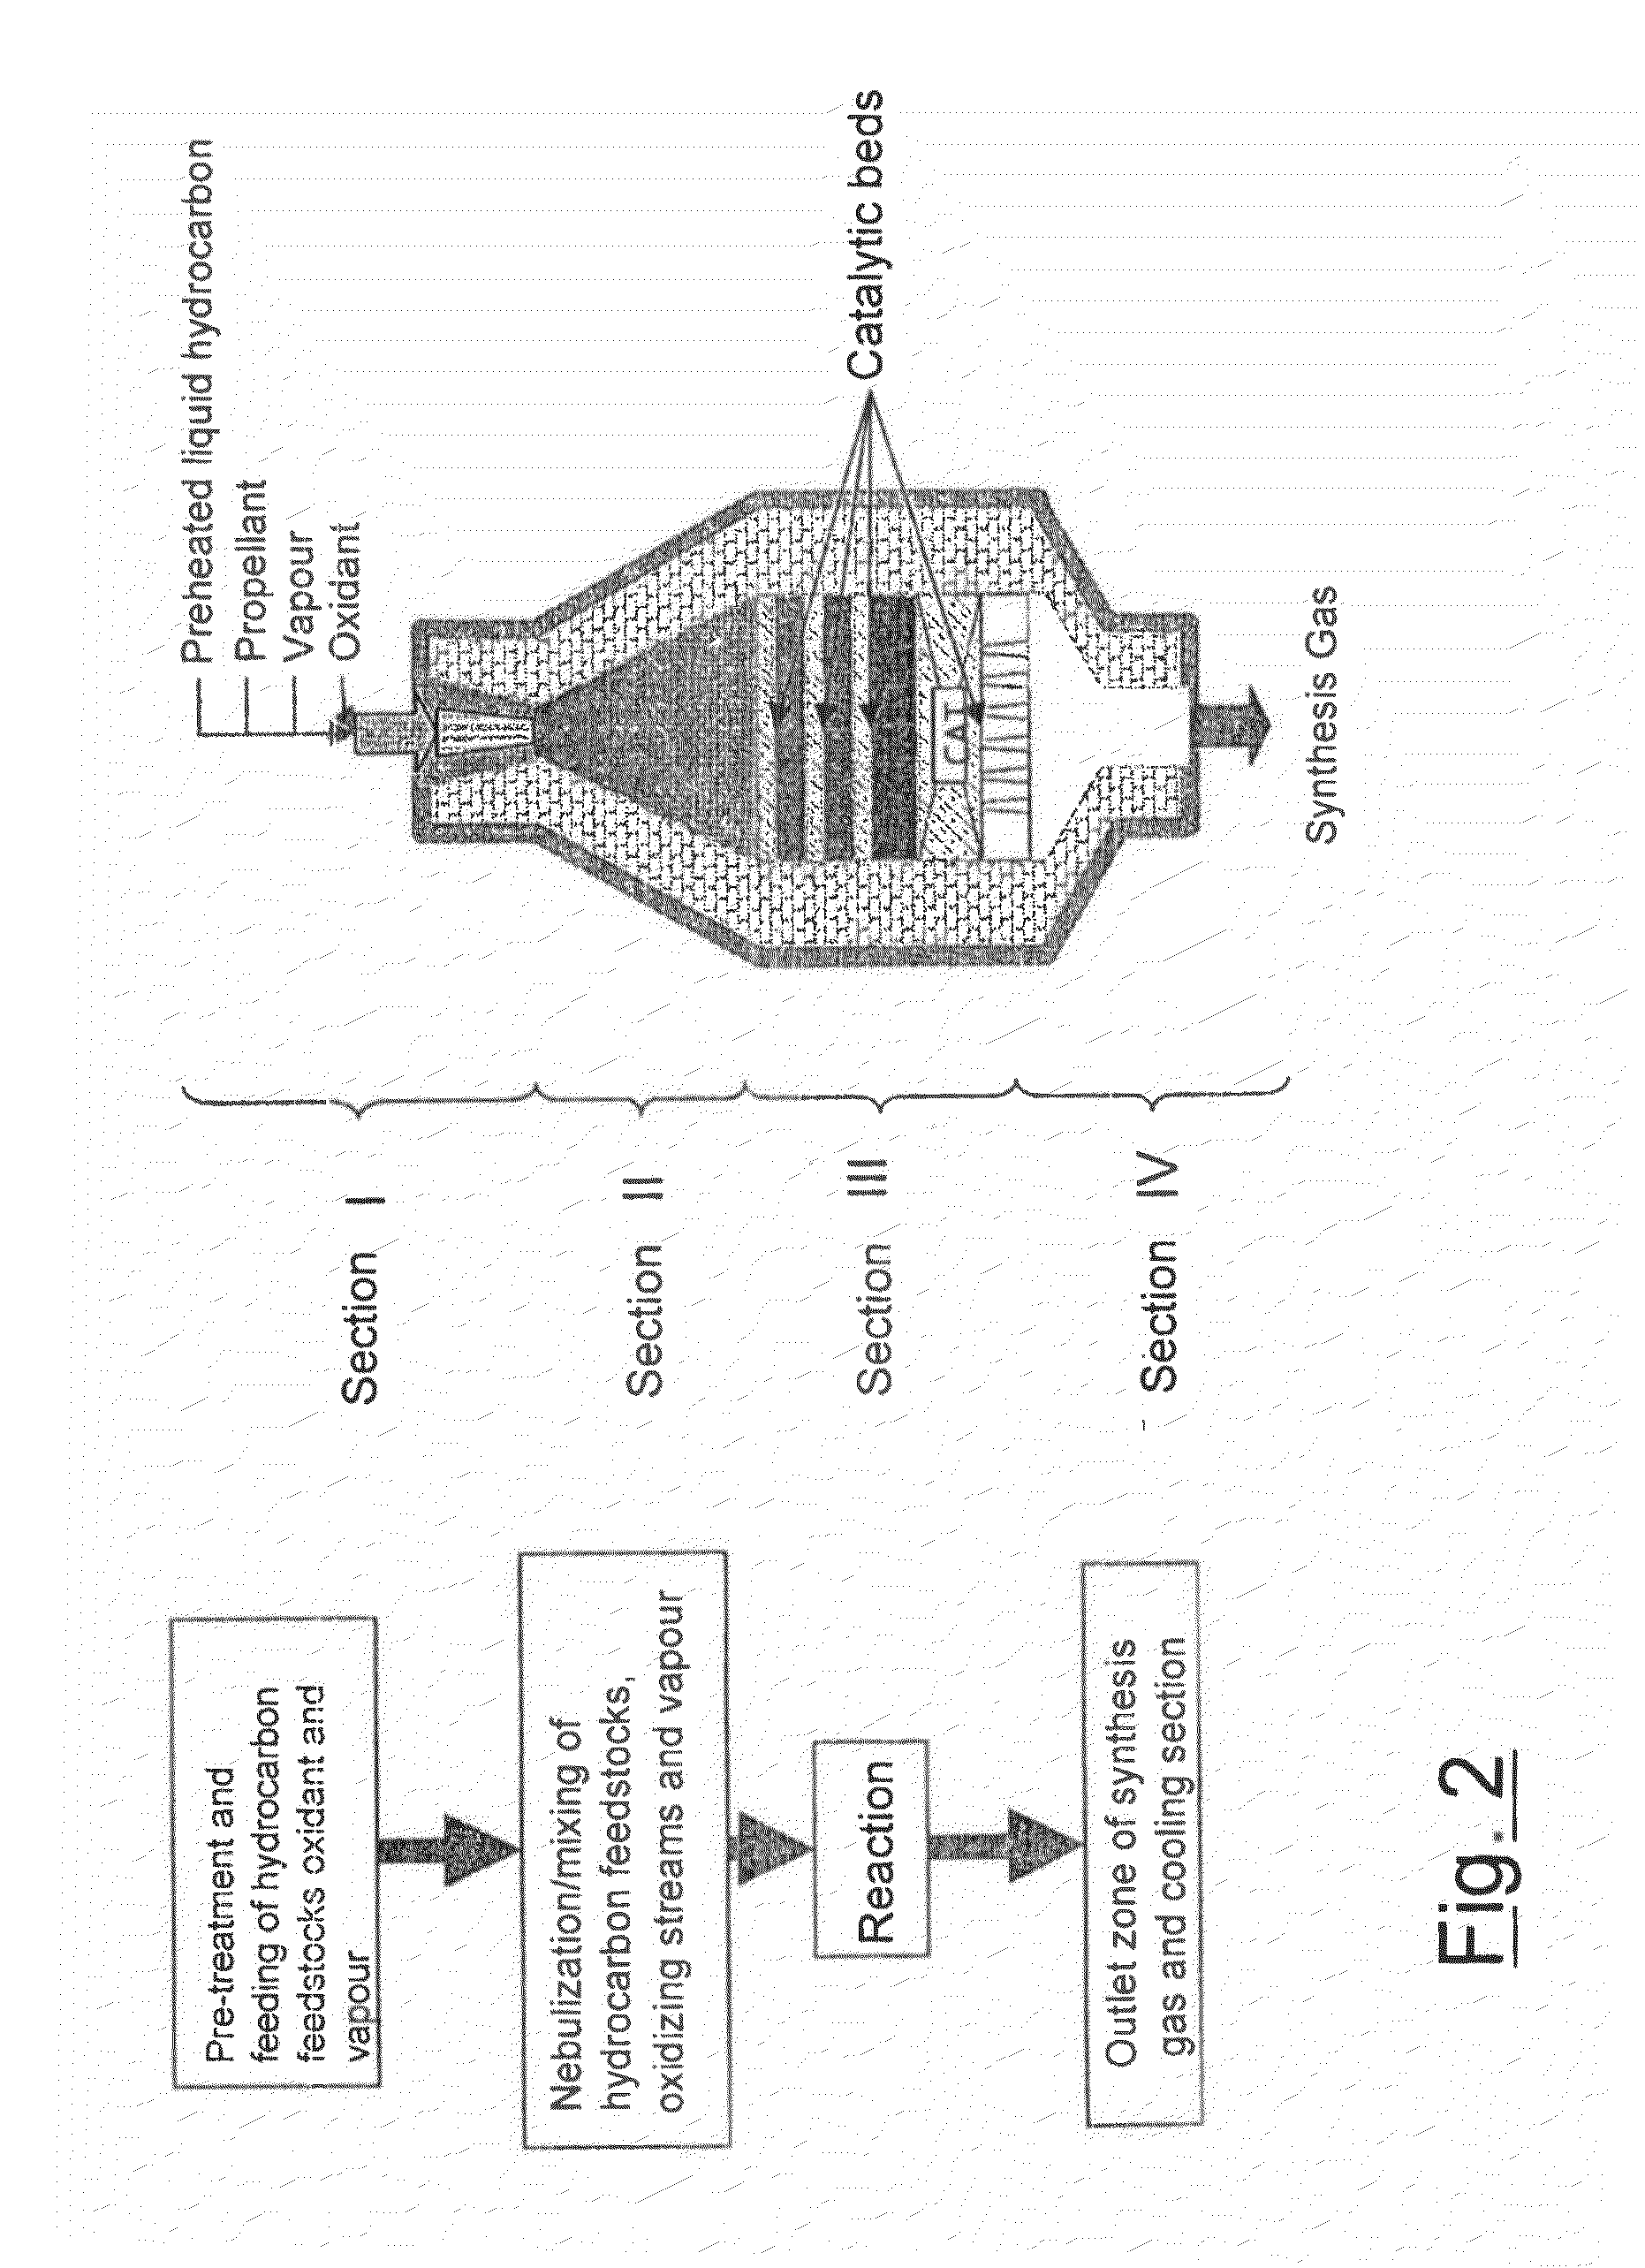 Process for the production of synthesis gas and hydrogen starting from liquid or gaseous hydrocarbons